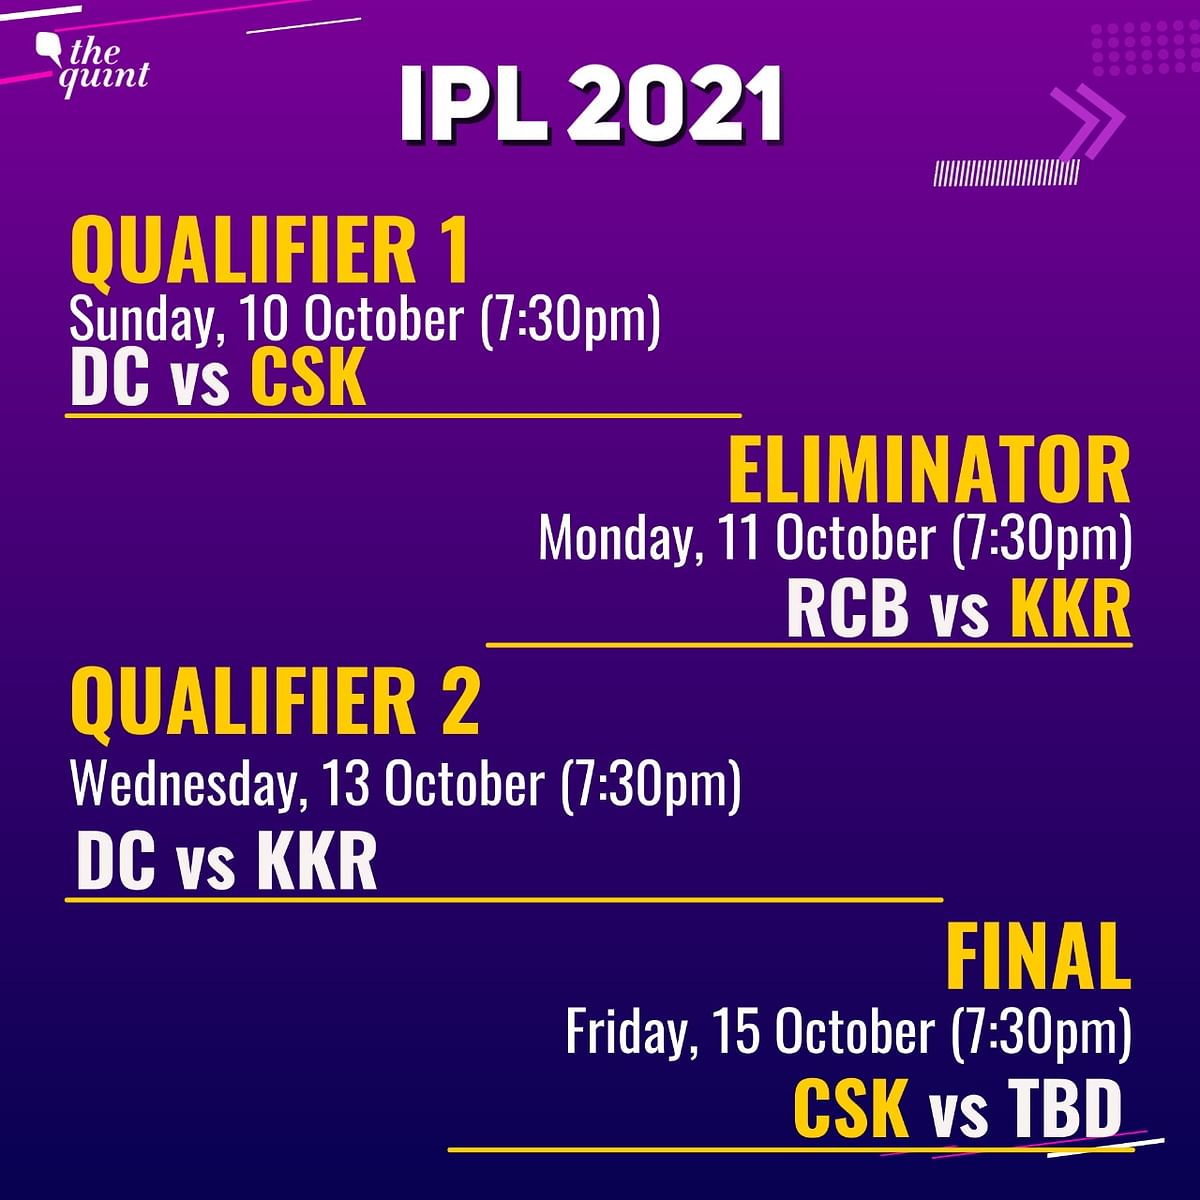 Chennai Super Kings have already progressed to the final of IPL 2021.